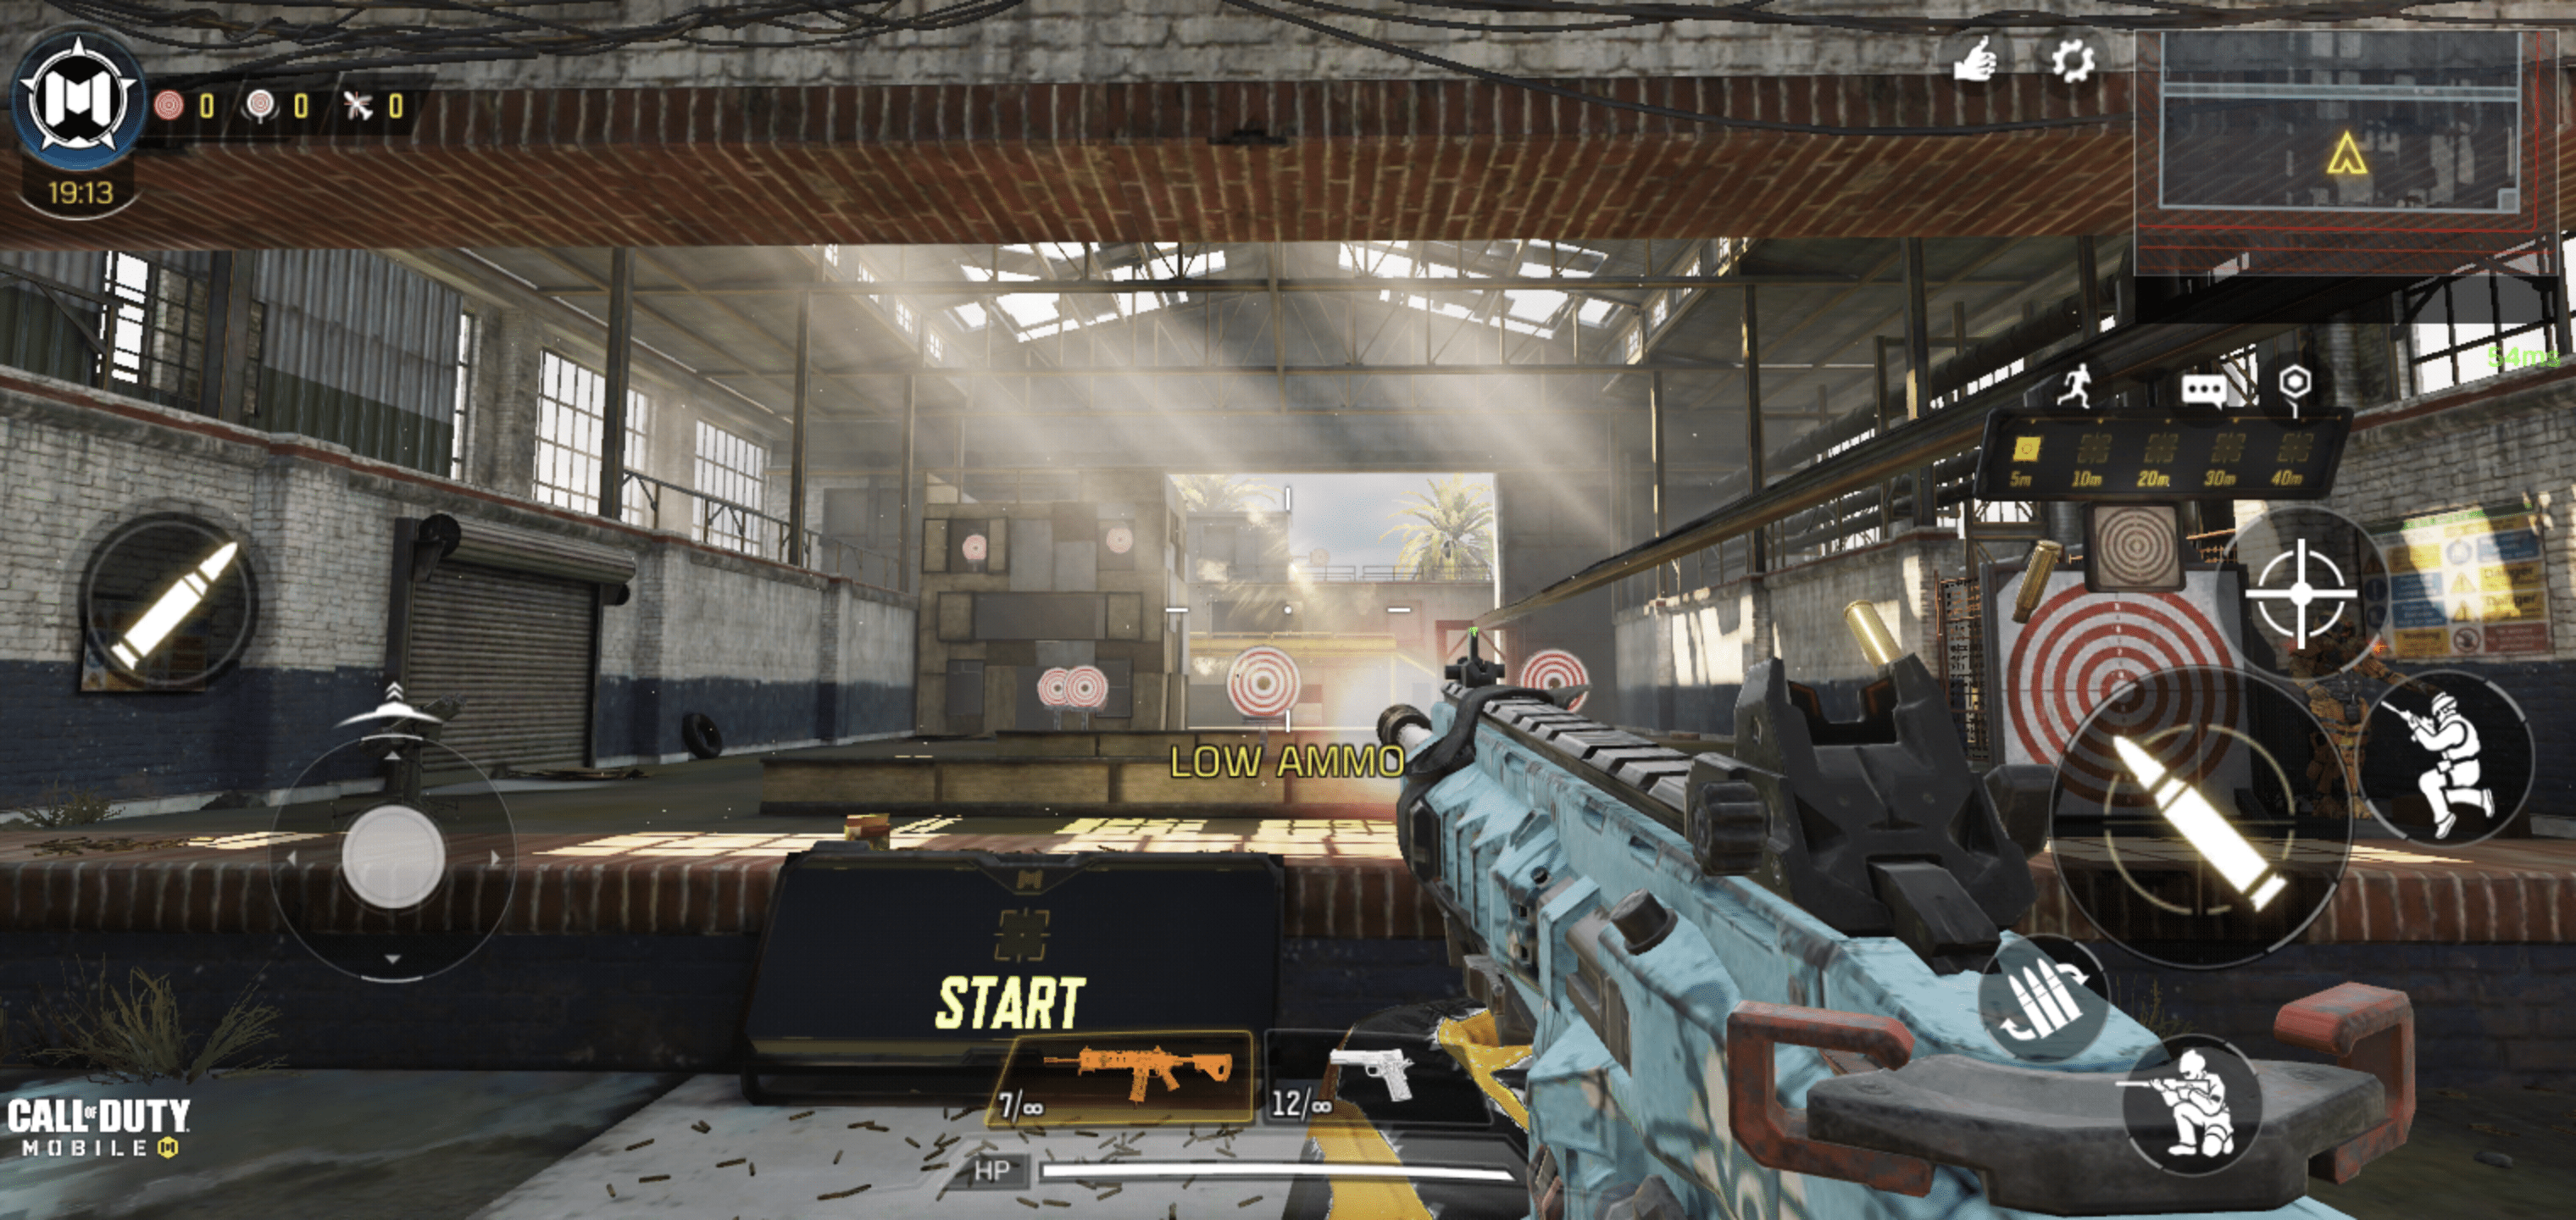 Hip Fire - Shooting Mode in COD Mobile